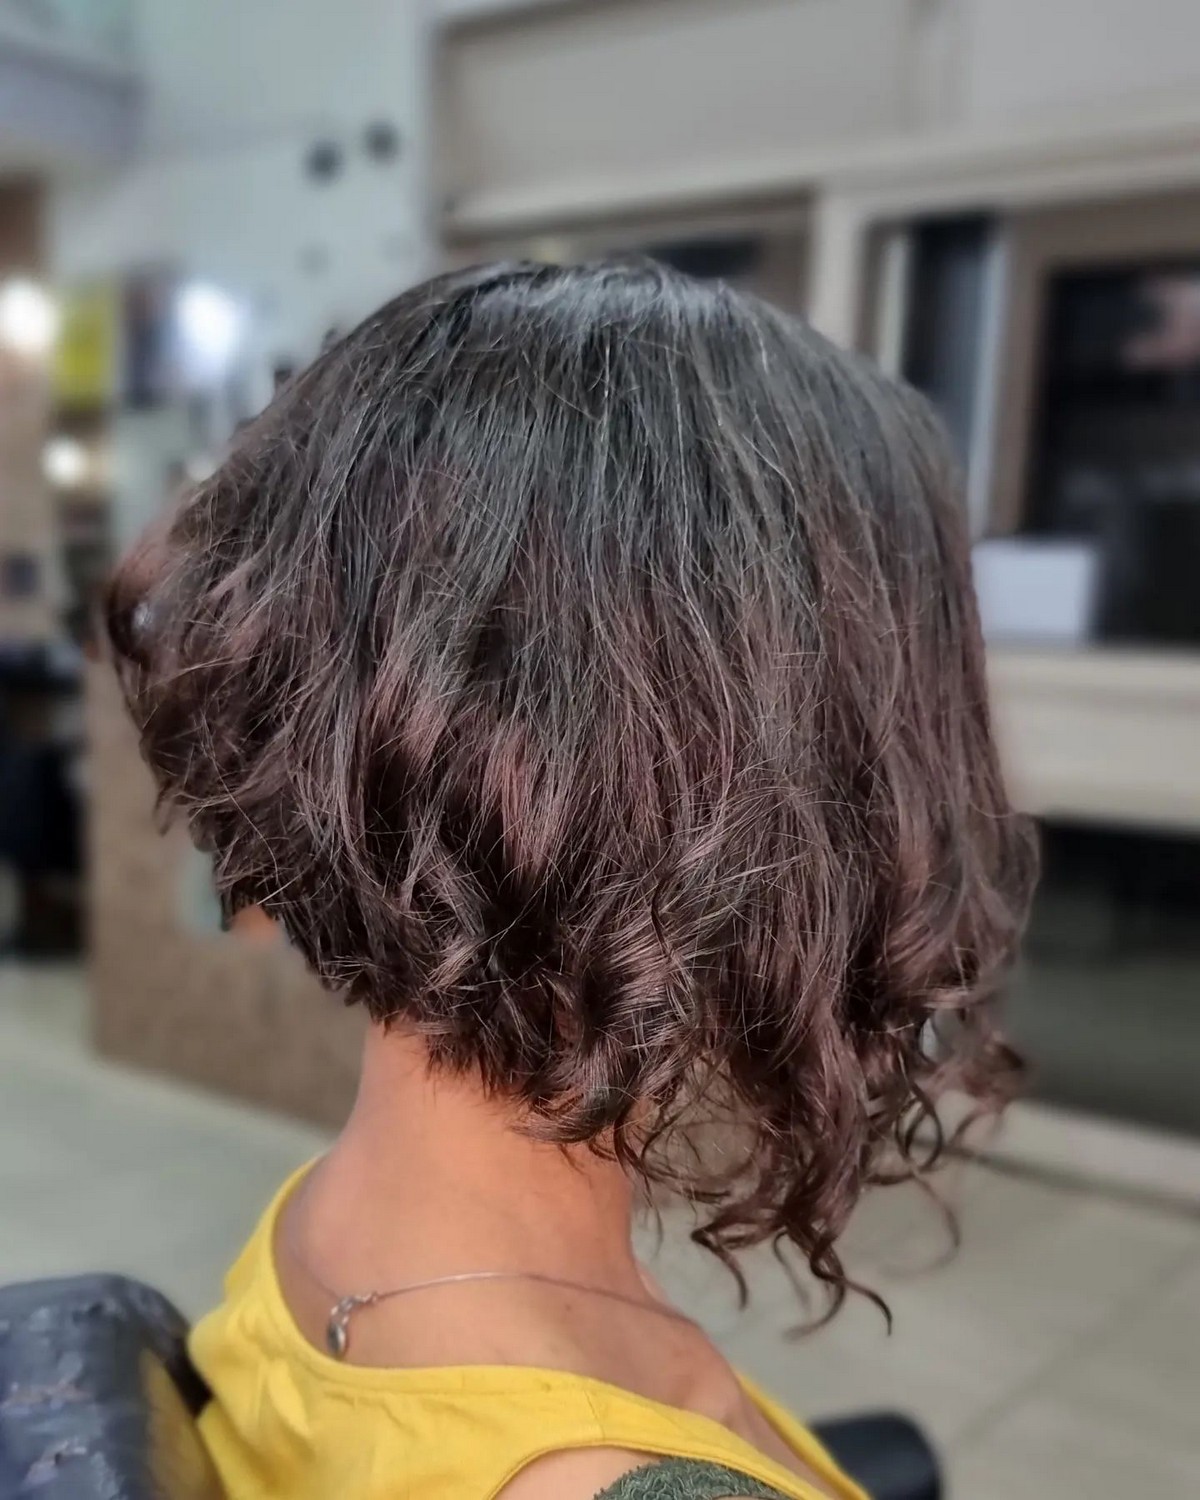 Cropped Edgy Short Bob Hairstyle